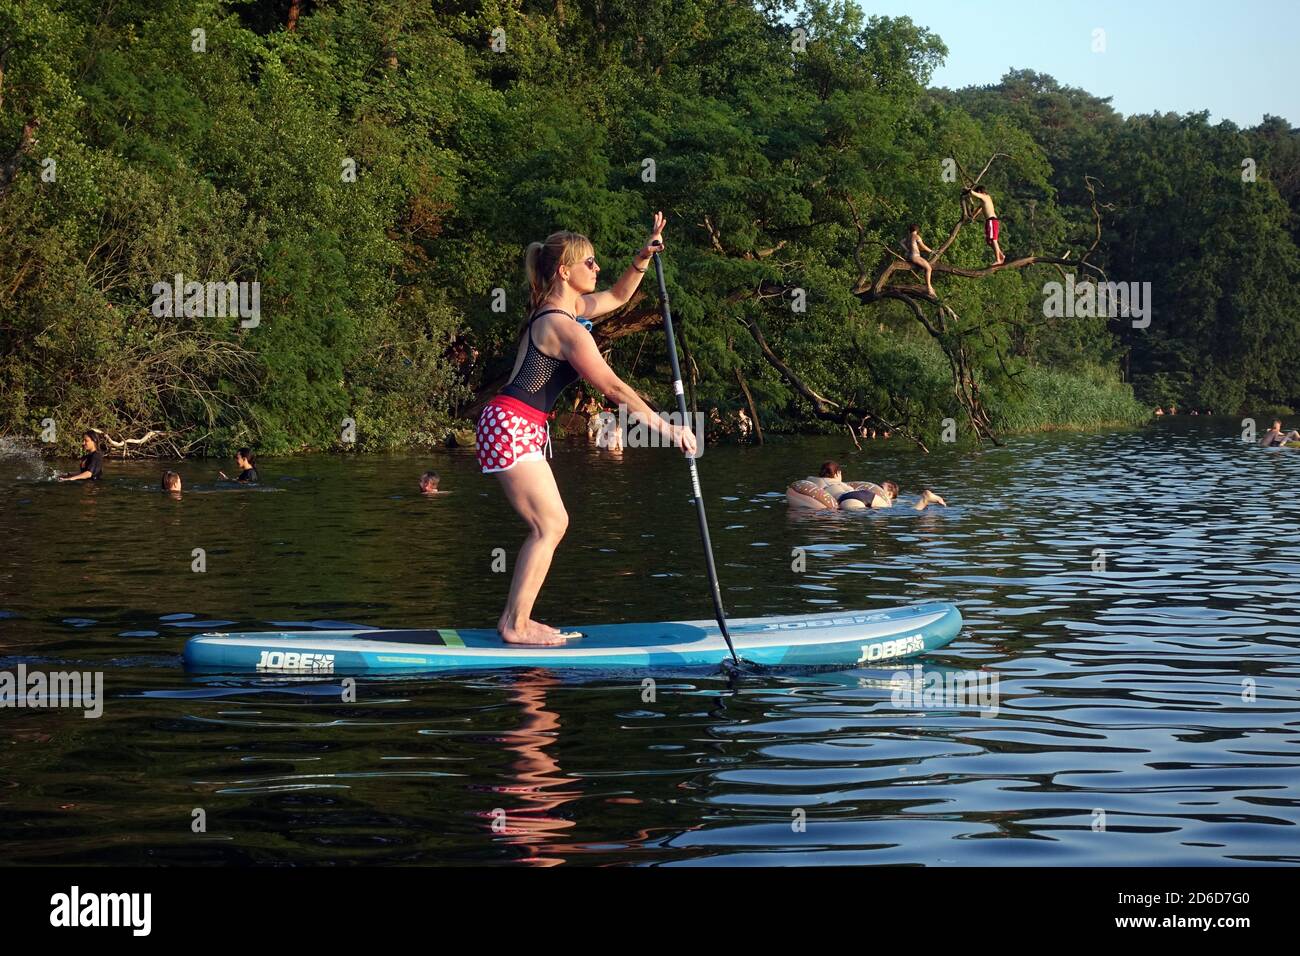 08.08.2020, Berlin, , Germany - Woman doing stand-up paddling on the  Schlachtensee. 00S200808D674CAROEX.JPG [MODEL RELEASE: NO, PROPERTY  RELEASE: NO Stock Photo - Alamy